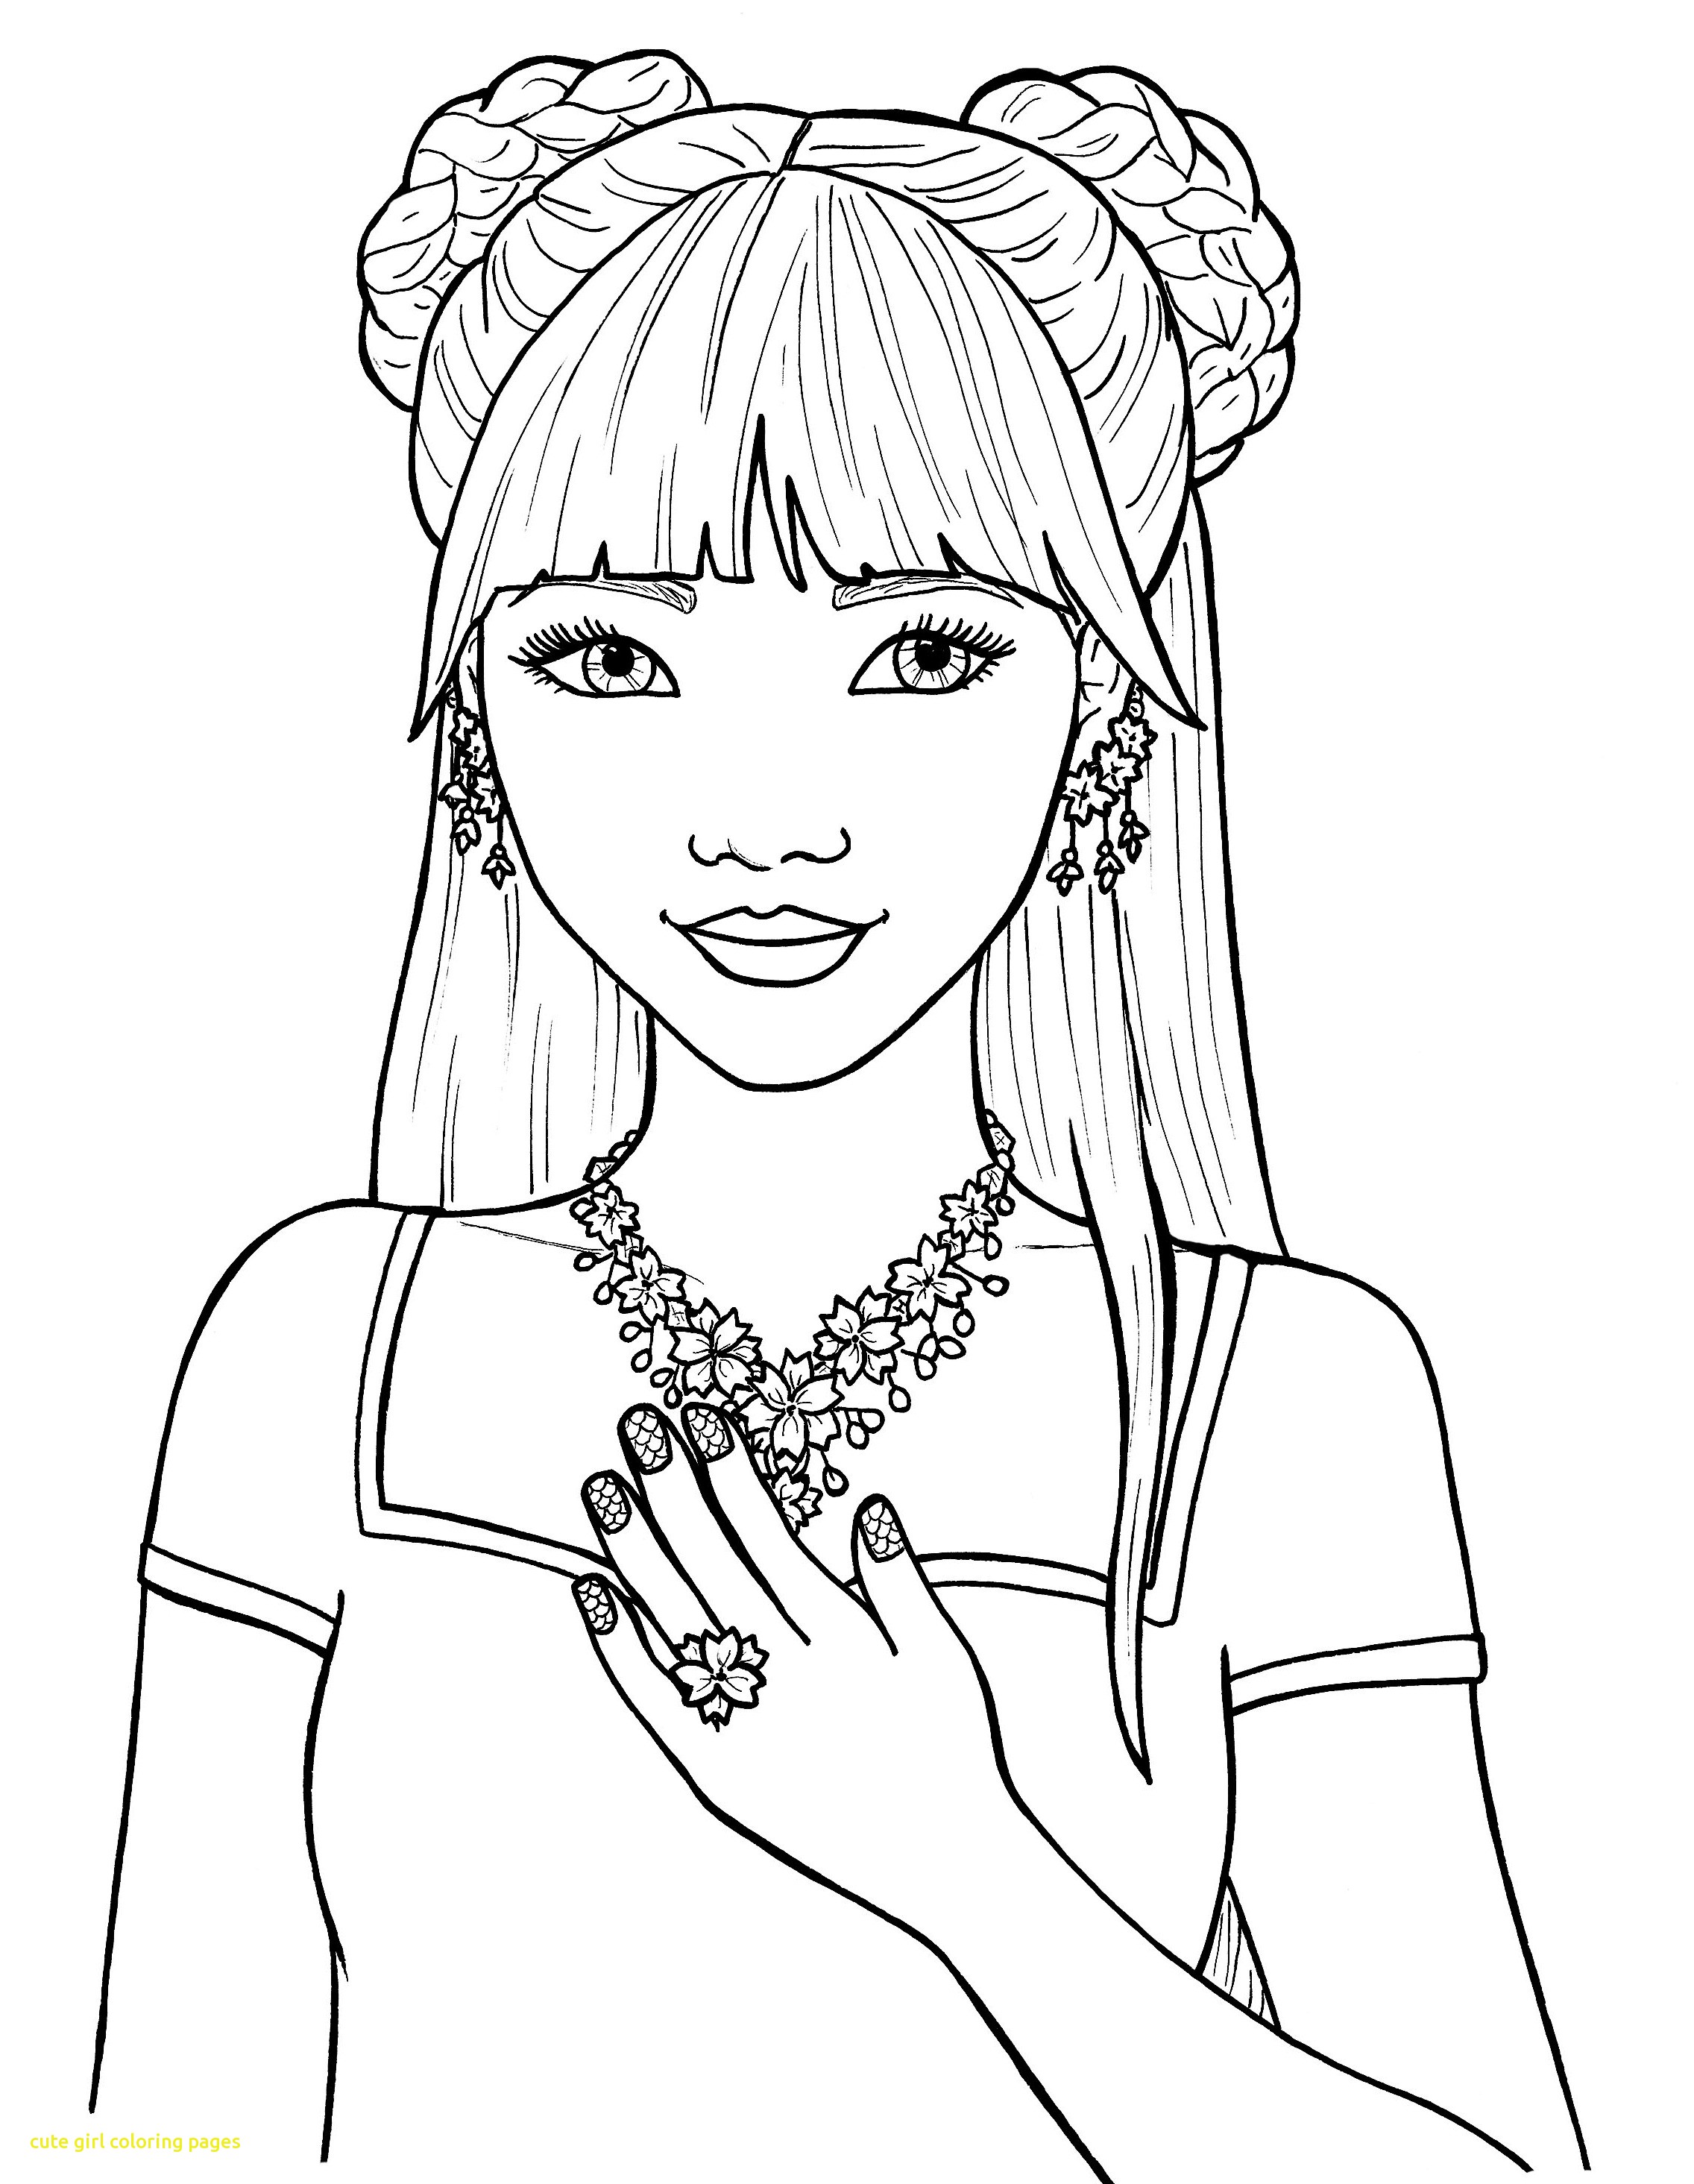 Coloring Pages For Girls - Best Coloring Pages For Kids - Coloring Home